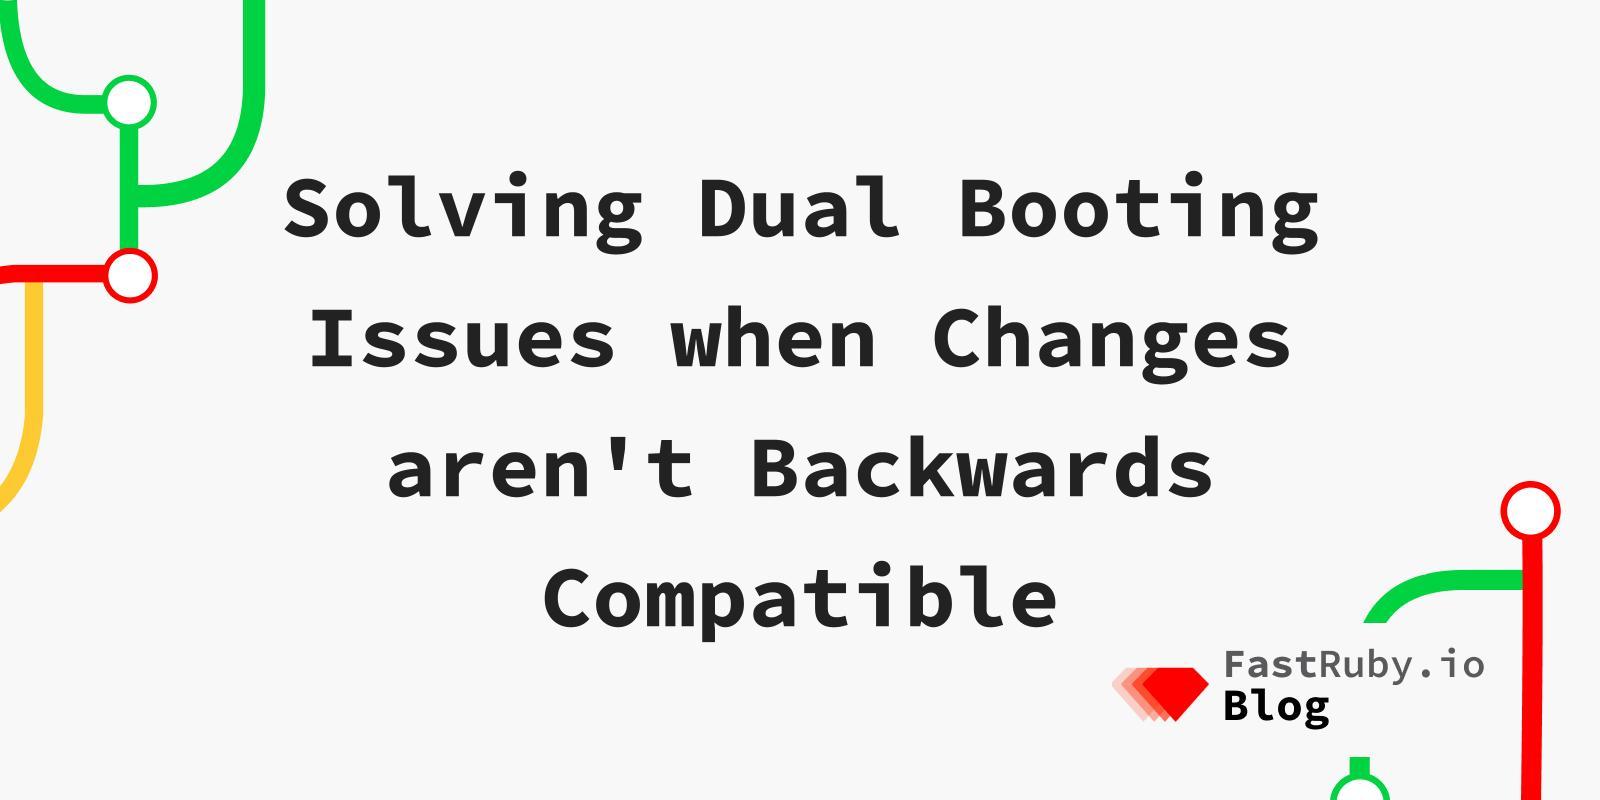 Solving Dual Booting Issues when Changes aren't Backwards Compatible